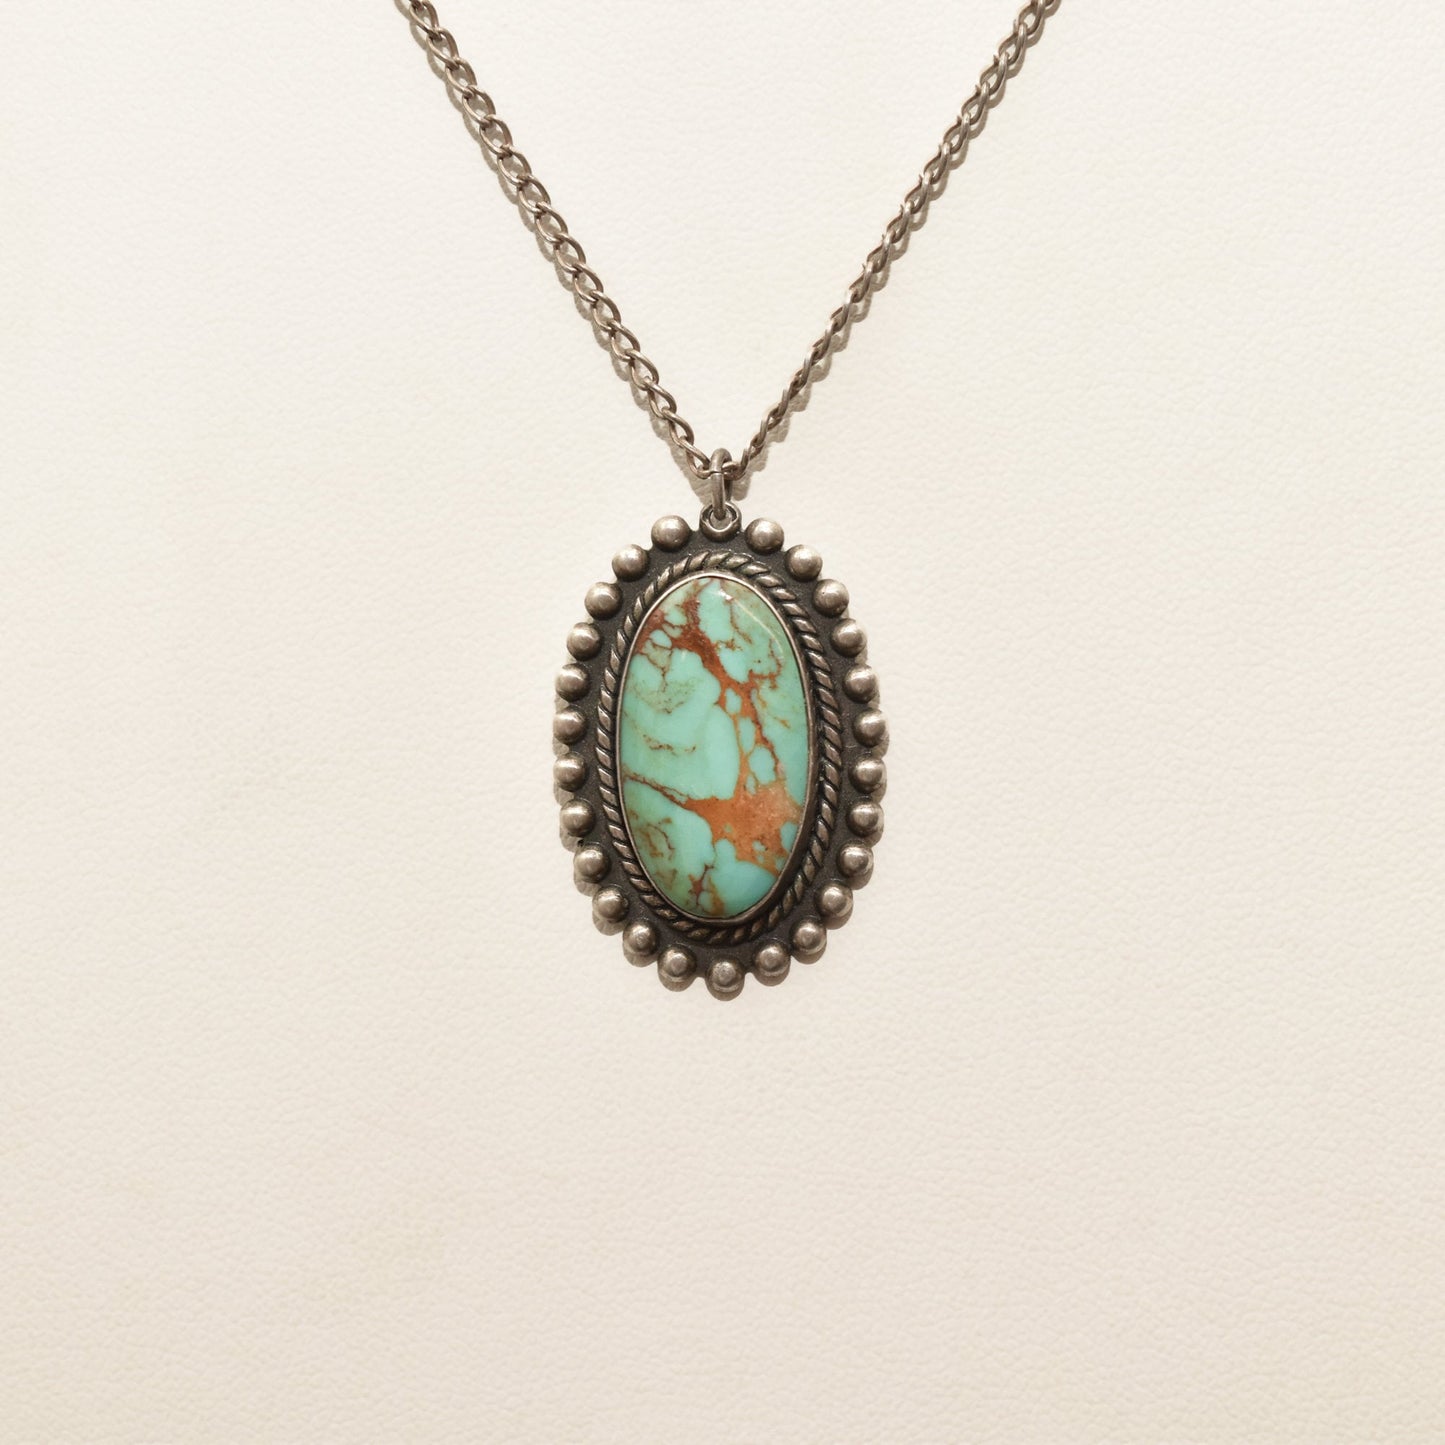 Native American Sterling Silver Turquoise Pendant Necklace, Signed JP, Gift For Loved One, 18" L